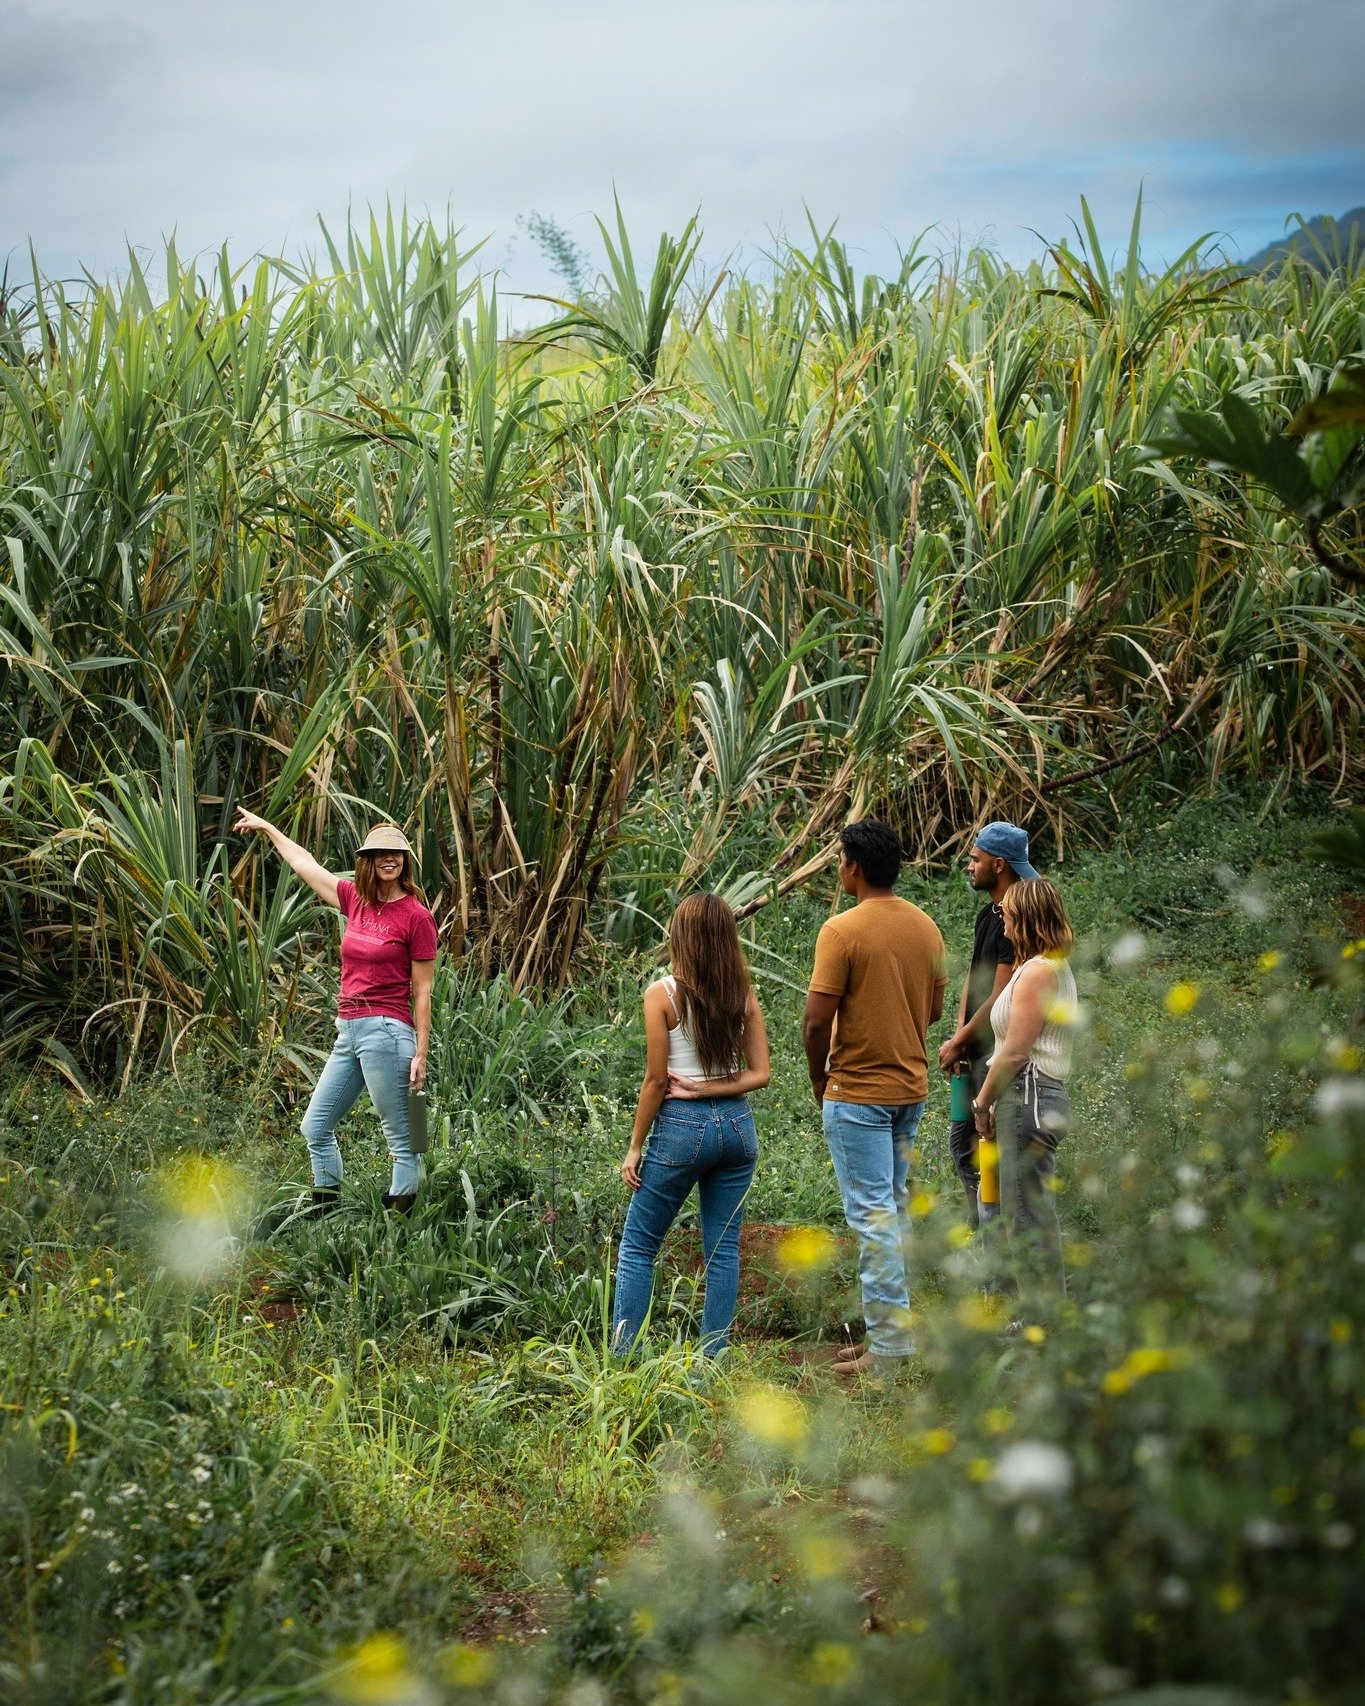 🌴 Looking for something quintessentially Hawaiian, unique, educational, and fun? Dive into the heart of Hawai'i's craft at Kō Hana Rum this weekend! Join us for a journey through our island farm, where you'll explore the heart of our rums, the field